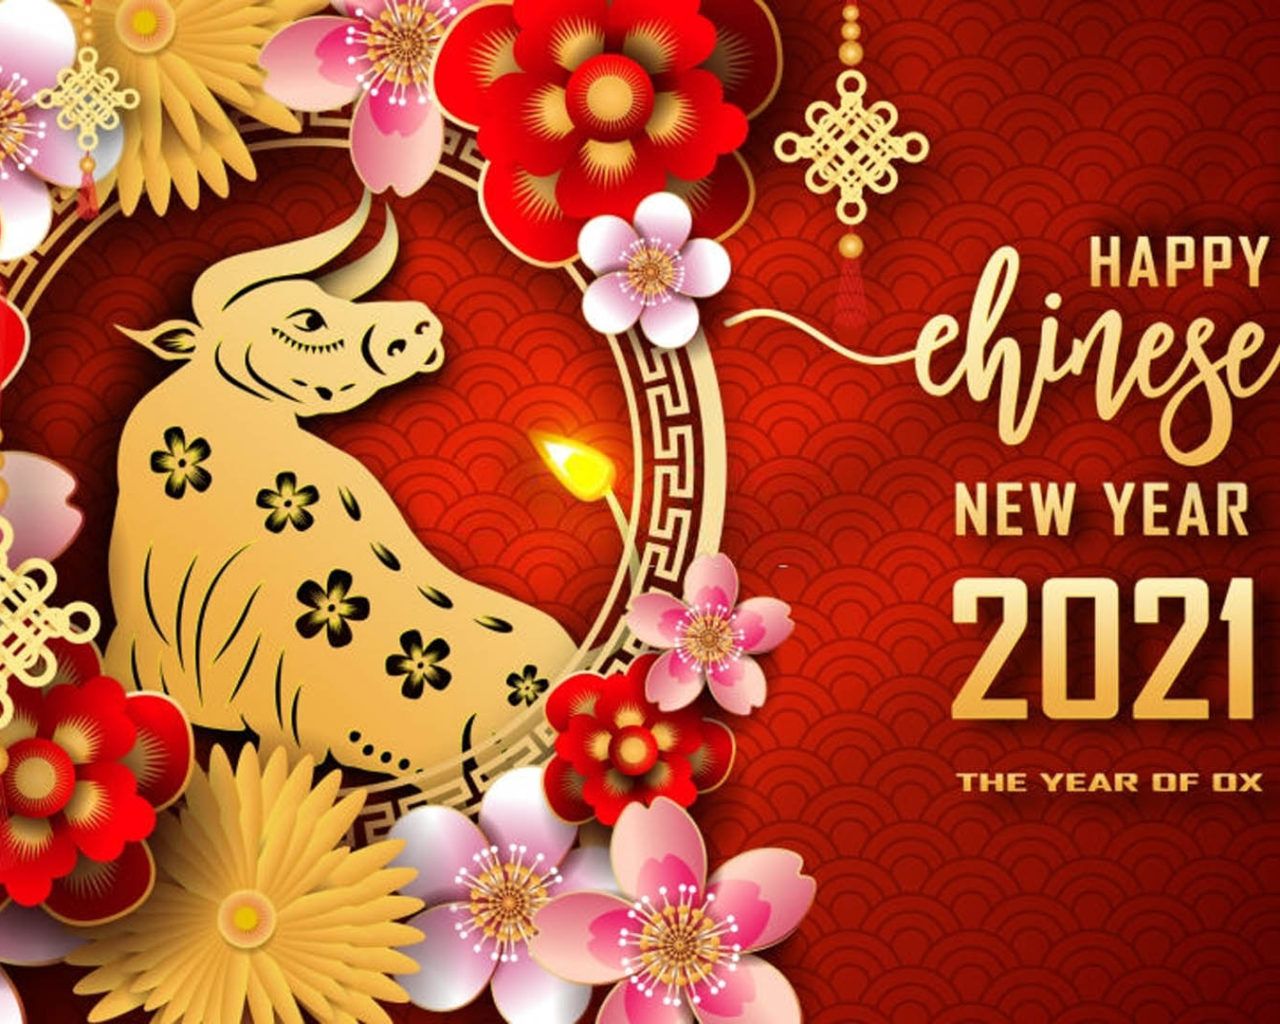 Happy Chinese New Year 2021 Red Wallpaper HD, Wallpaper13.com